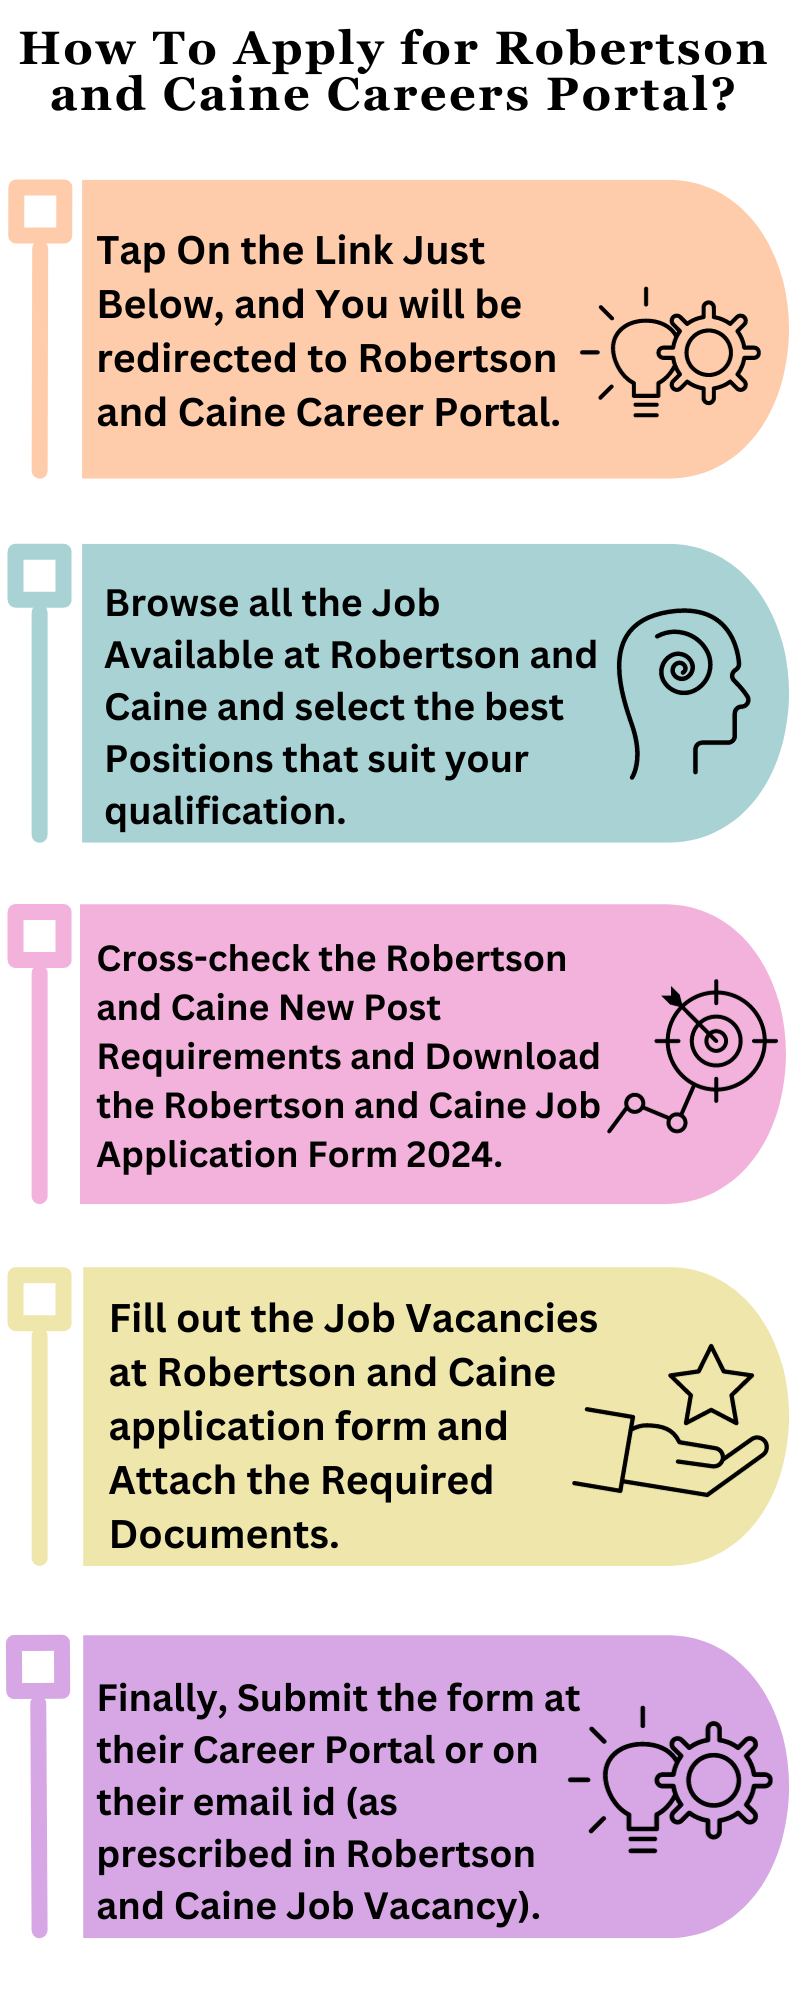 How To Apply for Robertson and Caine Careers Portal?